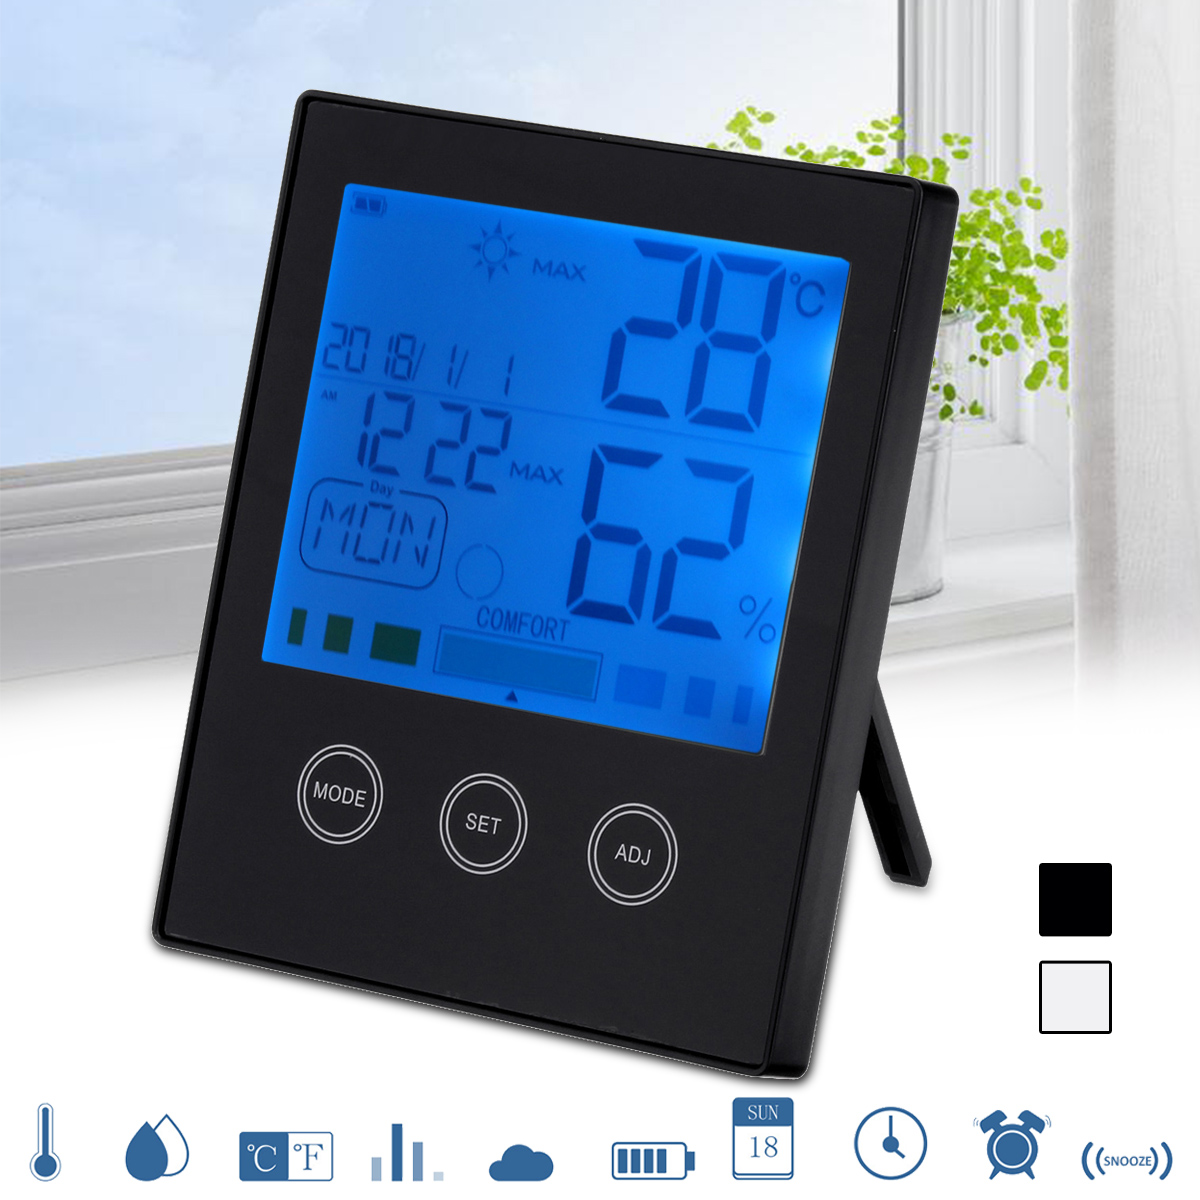 CH-909-Large-LCD-Digital-Thermometer-Hygrometer-Temperature-Humidity-Gauge-Alarm-Clock-Thermometer-1335367-5